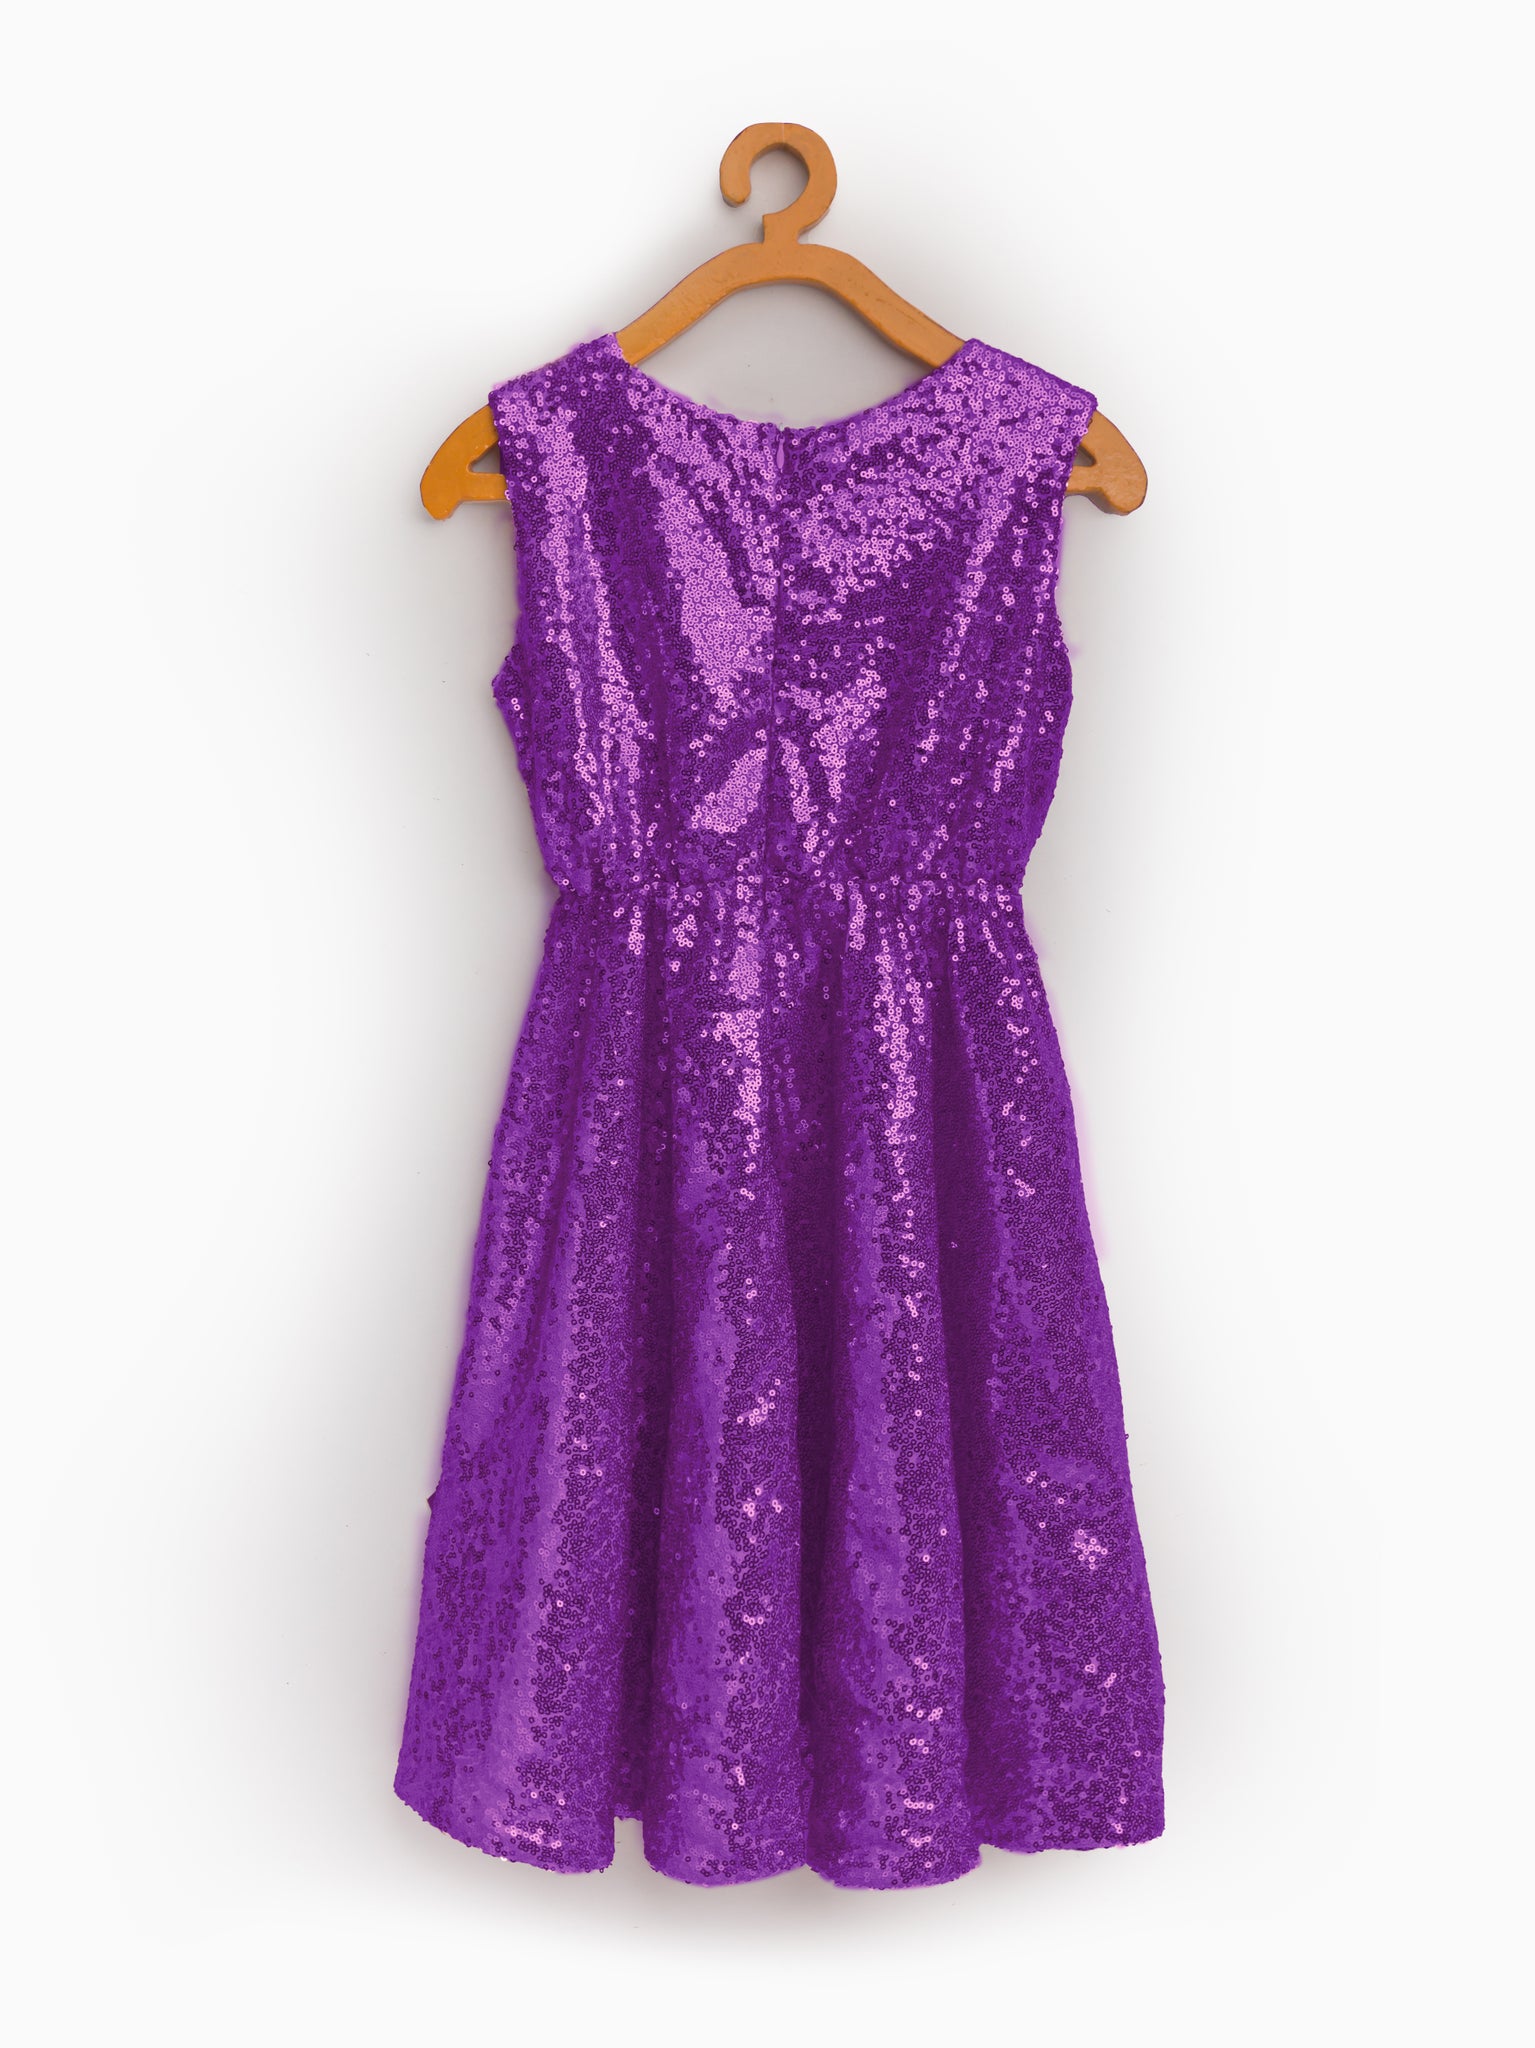 Sequin Dress for Girls - Uptownie